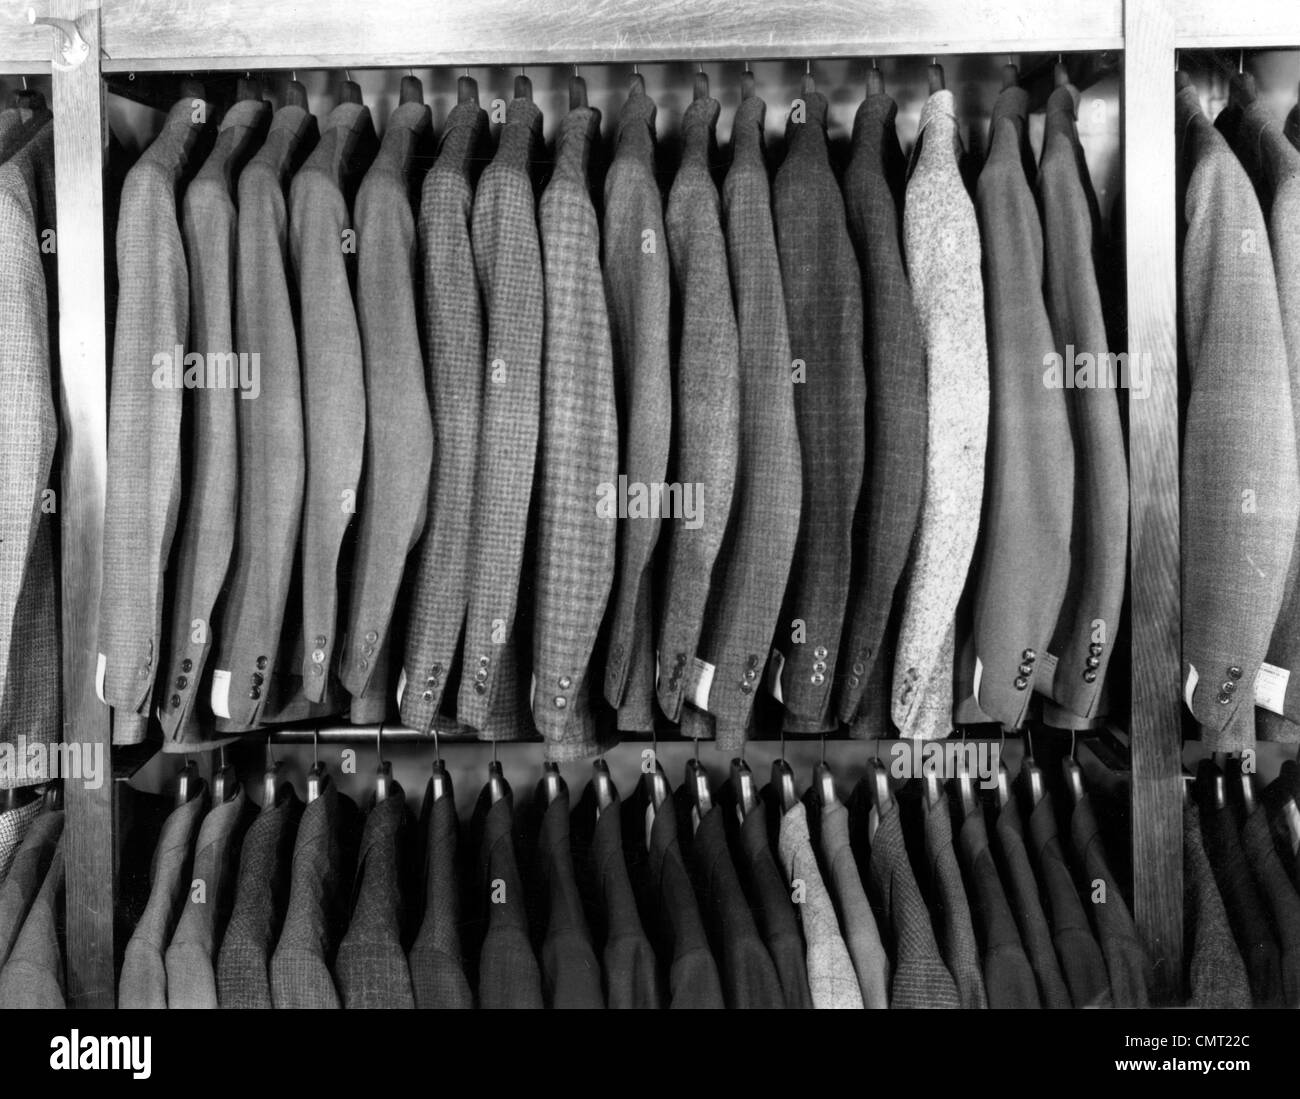 1940s RACK OF MEN'S WOOL JACKETS HANGING IN RETAIL STORE MEN'S FASHION CLOTHING SUITS Stock Photo